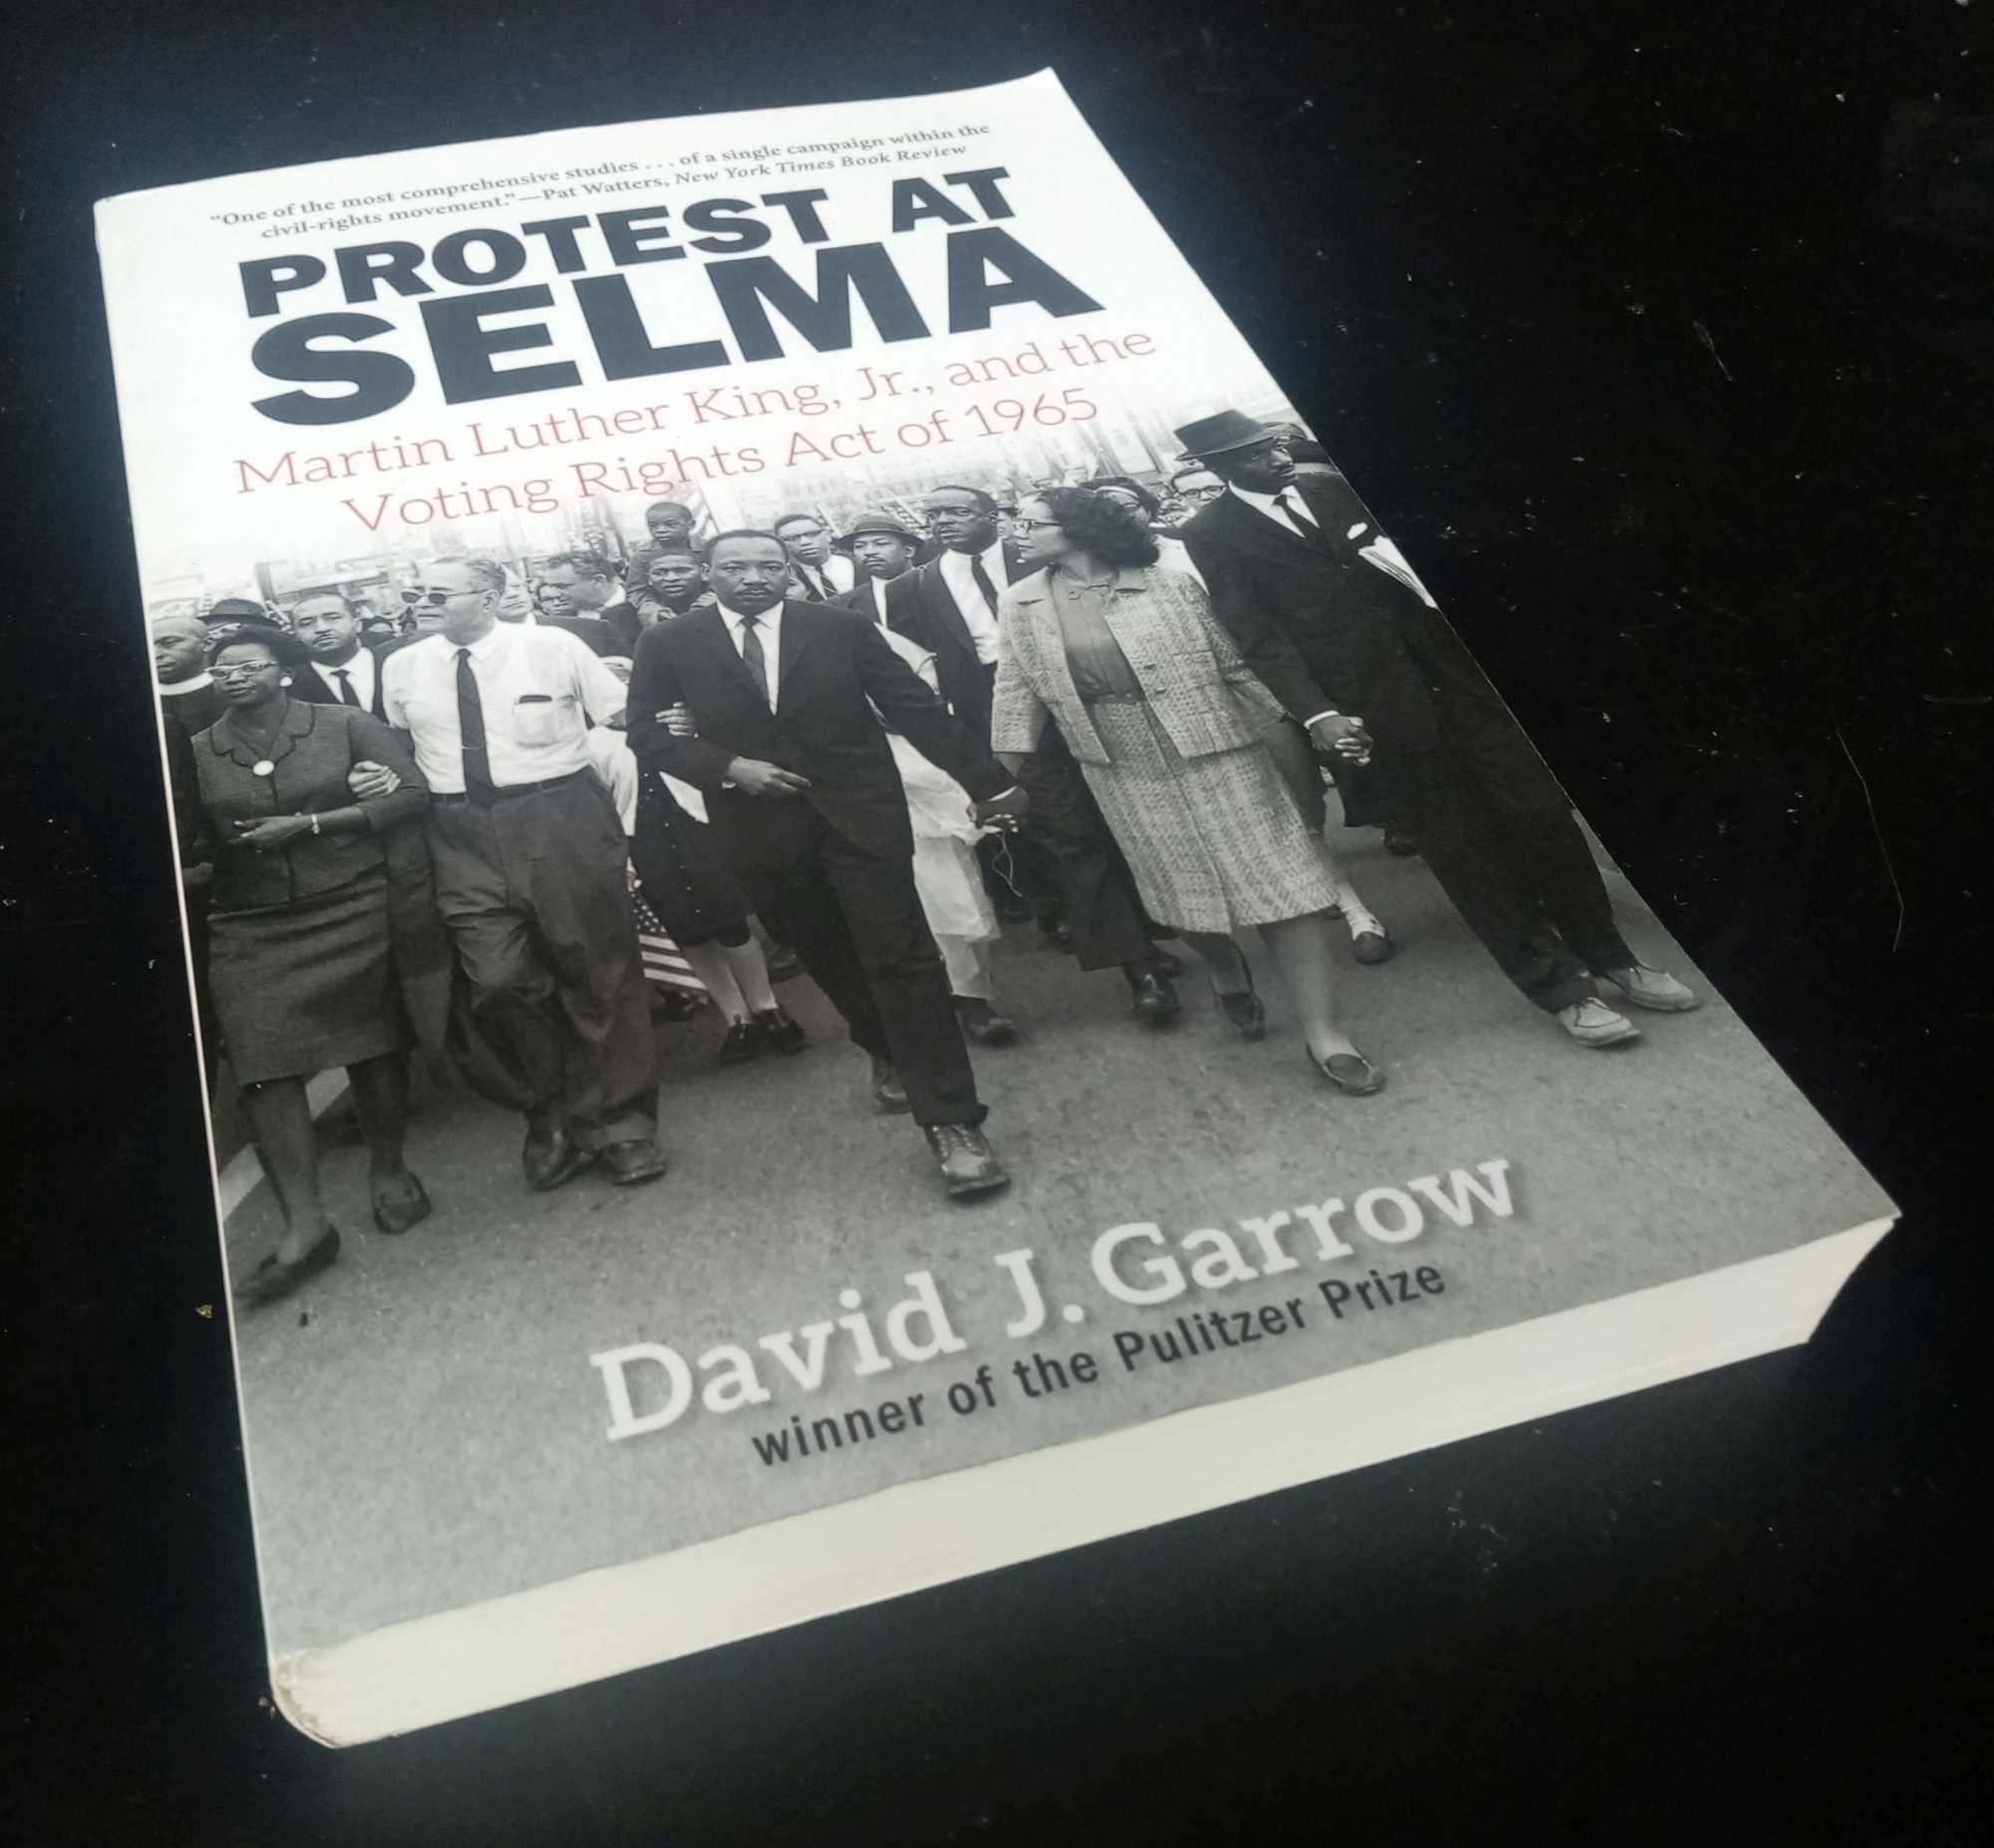 David J. Garrow - Protest at Selma: Martin Luther King, Jr., and the Voting Rights Act of 1965. Revised Edition, 2009